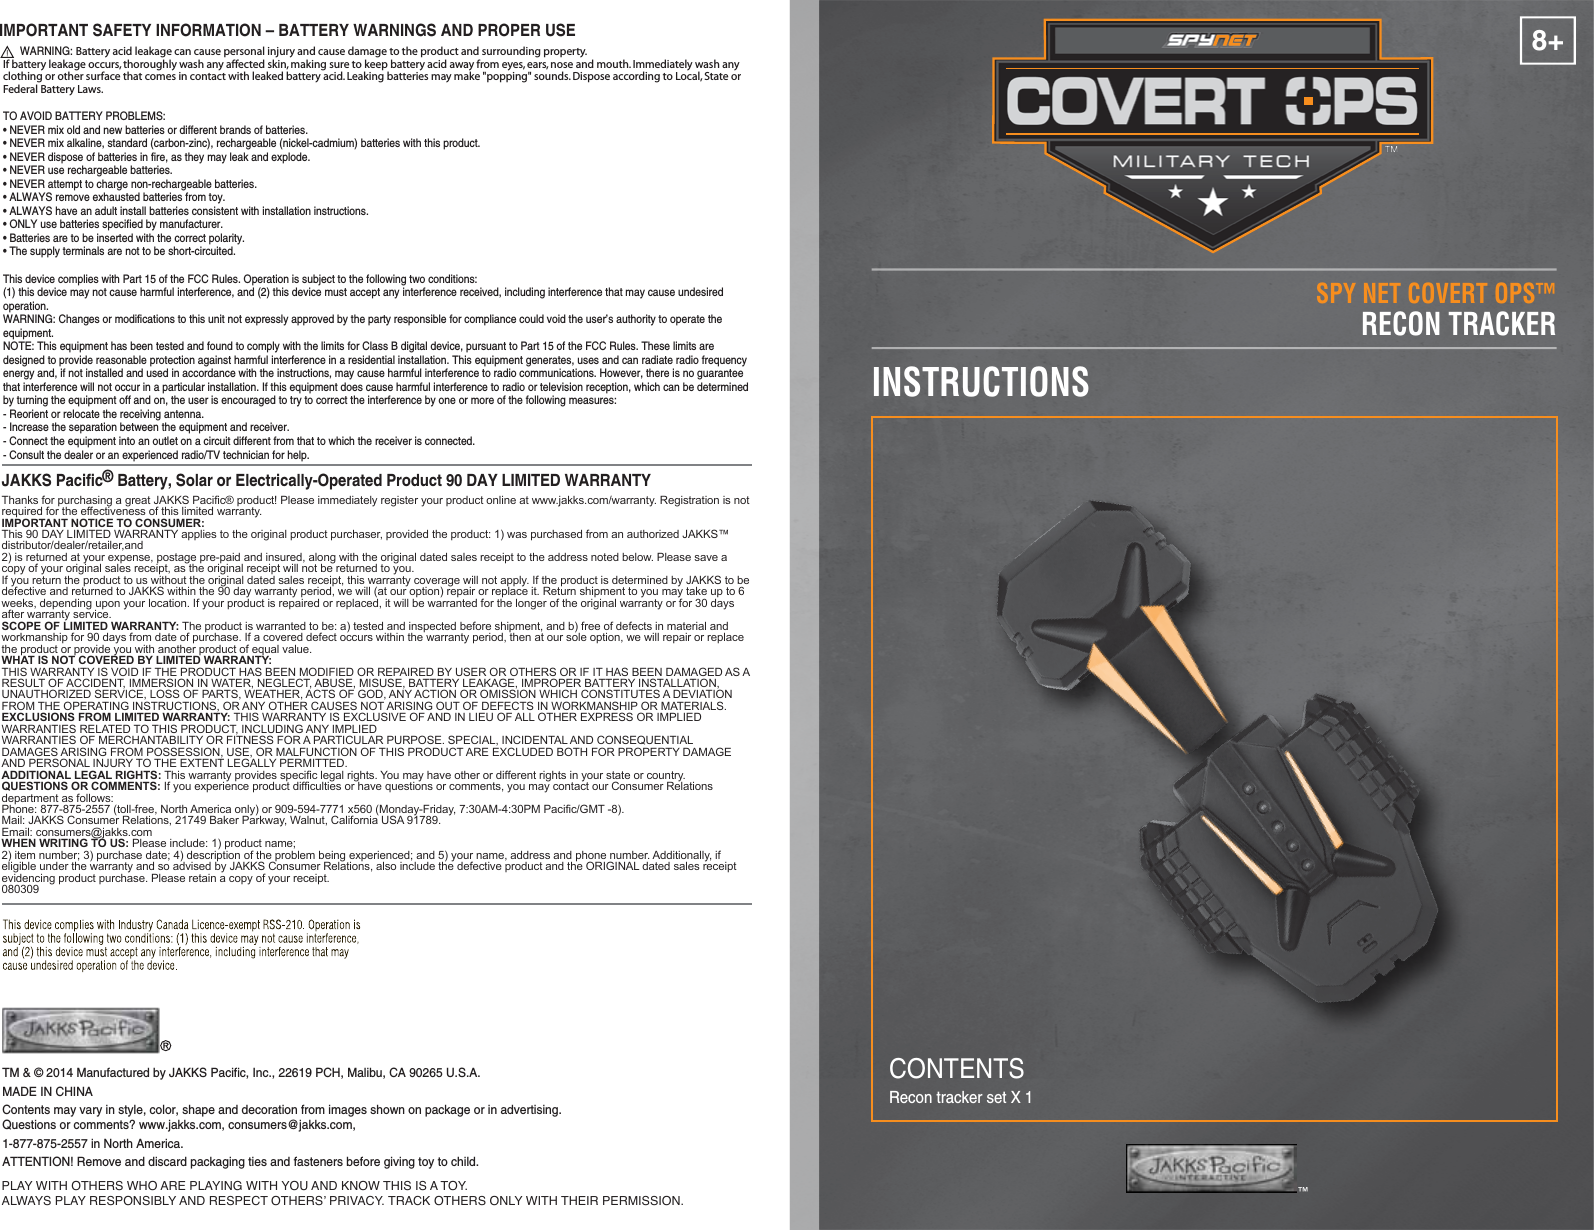 8+SPY NET COVERT OPS™INSTRUCTIONSRECON TRACKERRecon tracker set X 1TM &amp; © 2014 Manufactured by JAKKS Pacific, Inc., 22619 PCH, Malibu, CA 90265 U.S.A.MADE IN CHINAContents may vary in style, color, shape and decoration from images shown on package or in advertising. Questions or comments? www.jakks.com, consumers@jakks.com,1-877-875-2557 in North America.ATTENTION! Remove and discard packaging ties and fasteners before giving toy to child.™PLAY WITH OTHERS WHO ARE PLAYING WITH YOU AND KNOW THIS IS A TOY.ALWAYS PLAY RESPONSIBLY AND RESPECT OTHERS’ PRIVACY. TRACK OTHERS ONLY WITH THEIR PERMISSION.CONTENTSJAKKS Pacific® Battery, Solar or Electrically-Operated Product 90 DAY LIMITED WARRANTYThanks for purchasing a great JAKKS Pacific® product! Please immediately register your product online at www.jakks.com/warranty. Registration is not required for the effectiveness of this limited warranty.IMPORTANT NOTICE TO CONSUMER:This 90 DAY LIMITED WARRANTY applies to the original product purchaser, provided the product: 1) was purchased from an authorized JAKKS™ distributor/dealer/retailer,and 2) is returned at your expense, postage pre-paid and insured, along with the original dated sales receipt to the address noted below. Please save a copy of your original sales receipt, as the original receipt will not be returned to you. If you return the product to us without the original dated sales receipt, this warranty coverage will not apply. If the product is determined by JAKKS to be defective and returned to JAKKS within the 90 day warranty period, we will (at our option) repair or replace it. Return shipment to you may take up to 6 weeks, depending upon your location. If your product is repaired or replaced, it will be warranted for the longer of the original warranty or for 30 days after warranty service.SCOPE OF LIMITED WARRANTY: The product is warranted to be: a) tested and inspected before shipment, and b) free of defects in material and workmanship for 90 days from date of purchase. If a covered defect occurs within the warranty period, then at our sole option, we will repair or replace the product or provide you with another product of equal value.WHAT IS NOT COVERED BY LIMITED WARRANTY: THIS WARRANTY IS VOID IF THE PRODUCT HAS BEEN MODIFIED OR REPAIRED BY USER OR OTHERS OR IF IT HAS BEEN DAMAGED AS A RESULT OF ACCIDENT, IMMERSION IN WATER, NEGLECT, ABUSE, MISUSE, BATTERY LEAKAGE, IMPROPER BATTERY INSTALLATION, UNAUTHORIZED SERVICE, LOSS OF PARTS, WEATHER, ACTS OF GOD, ANY ACTION OR OMISSION WHICH CONSTITUTES A DEVIATION FROM THE OPERATING INSTRUCTIONS, OR ANY OTHER CAUSES NOT ARISING OUT OF DEFECTS IN WORKMANSHIP OR MATERIALS.EXCLUSIONS FROM LIMITED WARRANTY: THIS WARRANTY IS EXCLUSIVE OF AND IN LIEU OF ALL OTHER EXPRESS OR IMPLIED WARRANTIES RELATED TO THIS PRODUCT, INCLUDING ANY IMPLIED WARRANTIES OF MERCHANTABILITY OR FITNESS FOR A PARTICULAR PURPOSE. SPECIAL, INCIDENTAL AND CONSEQUENTIAL DAMAGES ARISING FROM POSSESSION, USE, OR MALFUNCTION OF THIS PRODUCT ARE EXCLUDED BOTH FOR PROPERTY DAMAGE AND PERSONAL INJURY TO THE EXTENT LEGALLY PERMITTED. ADDITIONAL LEGAL RIGHTS: This warranty provides specific legal rights. You may have other or different rights in your state or country.QUESTIONS OR COMMENTS: If you experience product difficulties or have questions or comments, you may contact our Consumer Relations department as follows: Phone: 877-875-2557 (toll-free, North America only) or 909-594-7771 x560 (Monday-Friday, 7:30AM-4:30PM Pacific/GMT -8). Mail: JAKKS Consumer Relations, 21749 Baker Parkway, Walnut, California USA 91789. Email: consumers@jakks.comWHEN WRITING TO US: Please include: 1) product name; 2) item number; 3) purchase date; 4) description of the problem being experienced; and 5) your name, address and phone number. Additionally, if eligible under the warranty and so advised by JAKKS Consumer Relations, also include the defective product and the ORIGINAL dated sales receipt evidencing product purchase. Please retain a copy of your receipt.080309IMPORTANT SAFETY INFORMATION – BATTERY WARNINGS AND PROPER USE      WARNING: Battery acid leakage can cause personal injury and cause damage to the product and surrounding property. If battery leakage occurs, thoroughly wash any affected skin, making sure to keep battery acid away from eyes, ears, nose and mouth. Immediately wash any clothing or other surface that comes in contact with leaked battery acid. Leaking batteries may make &quot;popping&quot; sounds. Dispose according to Local, State or Federal Battery Laws.TO AVOID BATTERY PROBLEMS:• NEVER mix old and new batteries or different brands of batteries.• NEVER mix alkaline, standard (carbon-zinc), rechargeable (nickel-cadmium) batteries with this product.• NEVER dispose of batteries in fire, as they may leak and explode.• NEVER use rechargeable batteries.• NEVER attempt to charge non-rechargeable batteries.• ALWAYS remove exhausted batteries from toy.• ALWAYS have an adult install batteries consistent with installation instructions.• ONLY use batteries specified by manufacturer.• Batteries are to be inserted with the correct polarity.• The supply terminals are not to be short-circuited.This device complies with Part 15 of the FCC Rules. Operation is subject to the following two conditions: (1) this device may not cause harmful interference, and (2) this device must accept any interference received, including interference that may cause undesired operation.WARNING: Changes or modifications to this unit not expressly approved by the party responsible for compliance could void the user’s authority to operate the equipment.NOTE: This equipment has been tested and found to comply with the limits for Class B digital device, pursuant to Part 15 of the FCC Rules. These limits are designed to provide reasonable protection against harmful interference in a residential installation. This equipment generates, uses and can radiate radio frequency energy and, if not installed and used in accordance with the instructions, may cause harmful interference to radio communications. However, there is no guarantee that interference will not occur in a particular installation. If this equipment does cause harmful interference to radio or television reception, which can be determined by turning the equipment off and on, the user is encouraged to try to correct the interference by one or more of the following measures:- Reorient or relocate the receiving antenna.- Increase the separation between the equipment and receiver.- Connect the equipment into an outlet on a circuit different from that to which the receiver is connected.- Consult the dealer or an experienced radio/TV technician for help. 